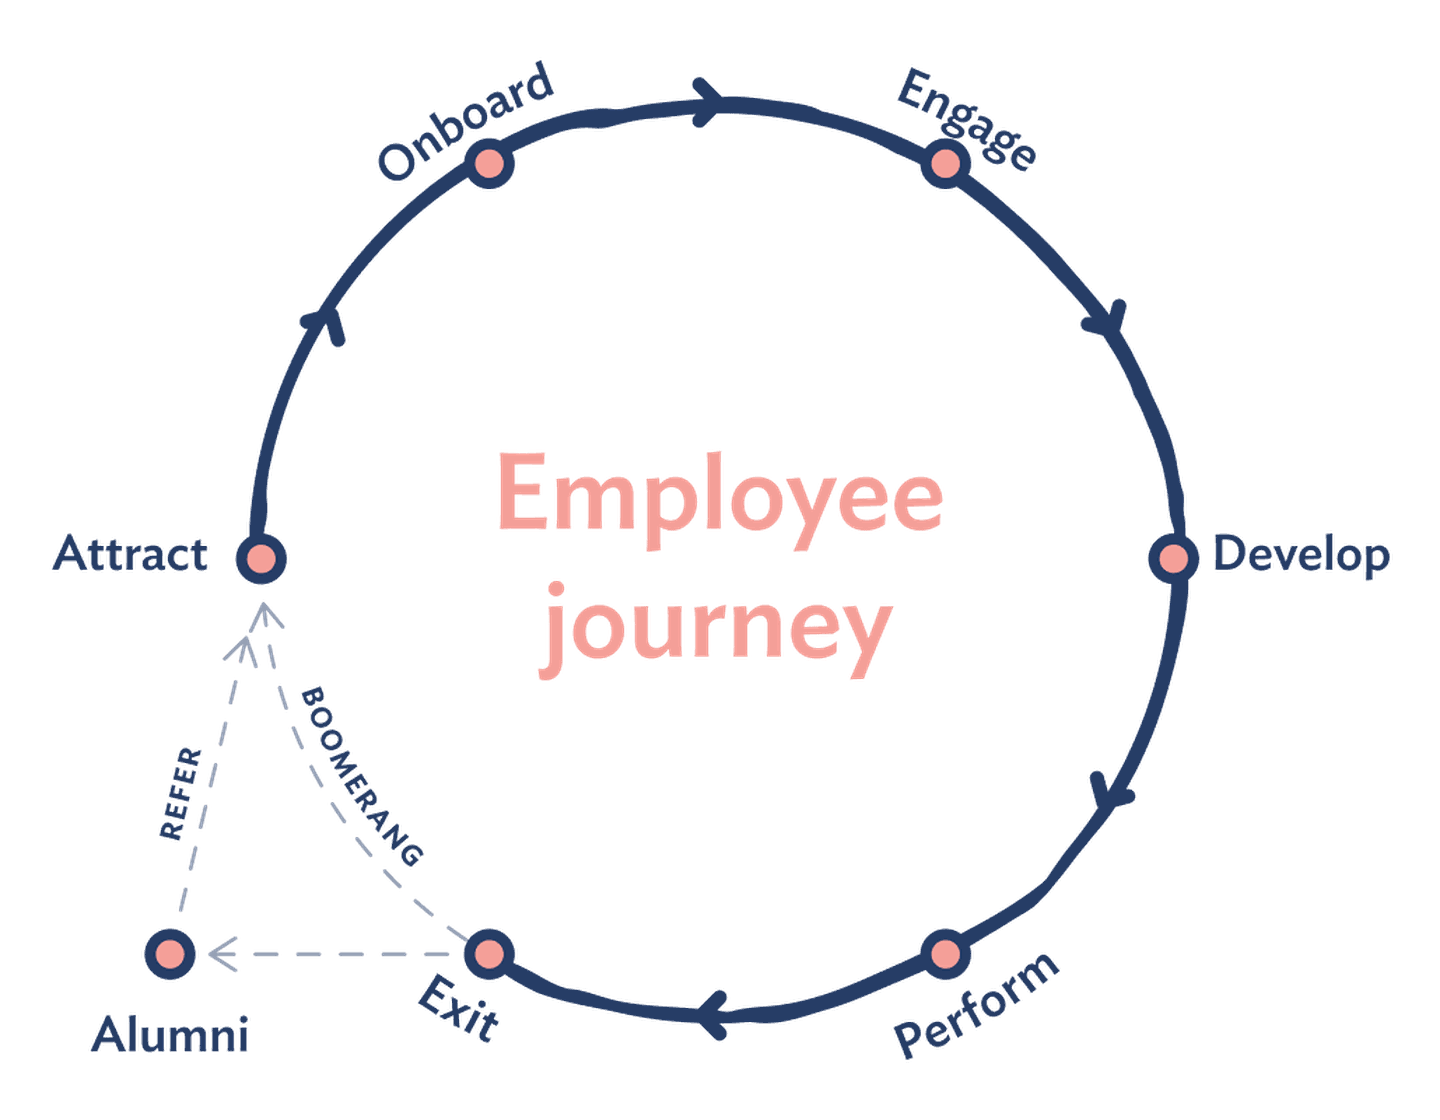 A visual representation of the employee journey in a circular format